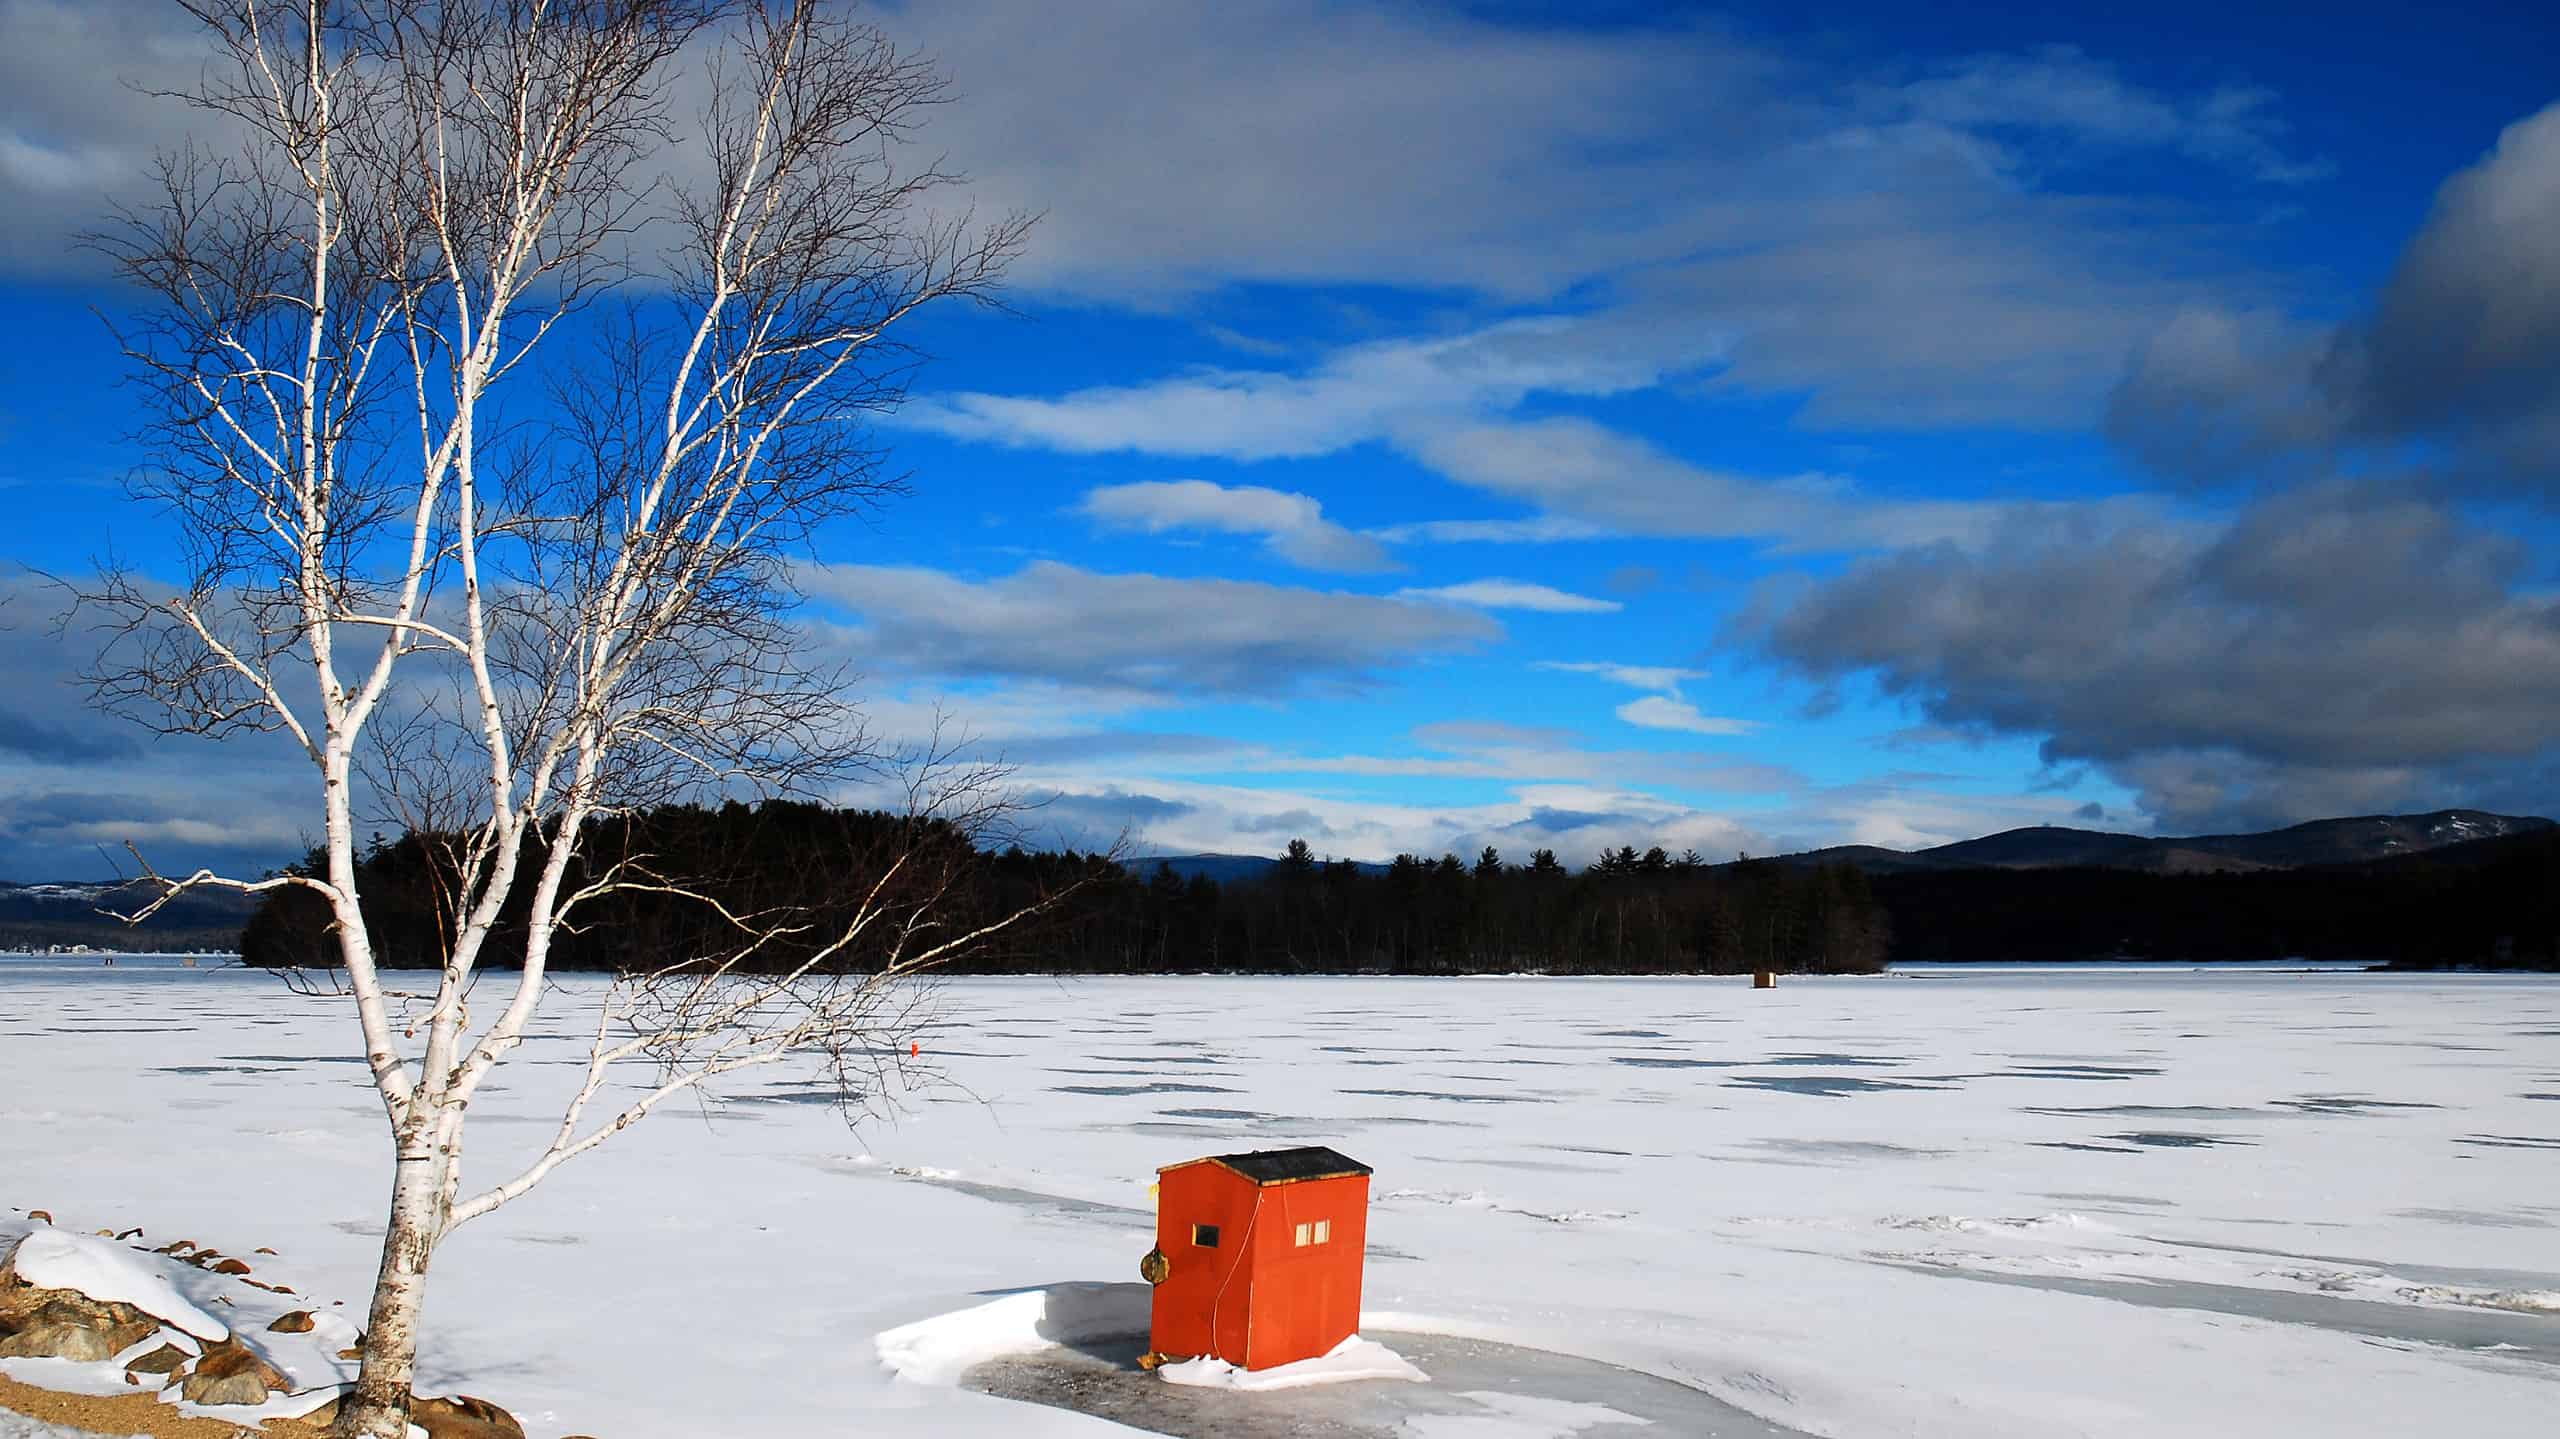 A lone, ice fishing shack stands on a frozen Newfound Lake in New England